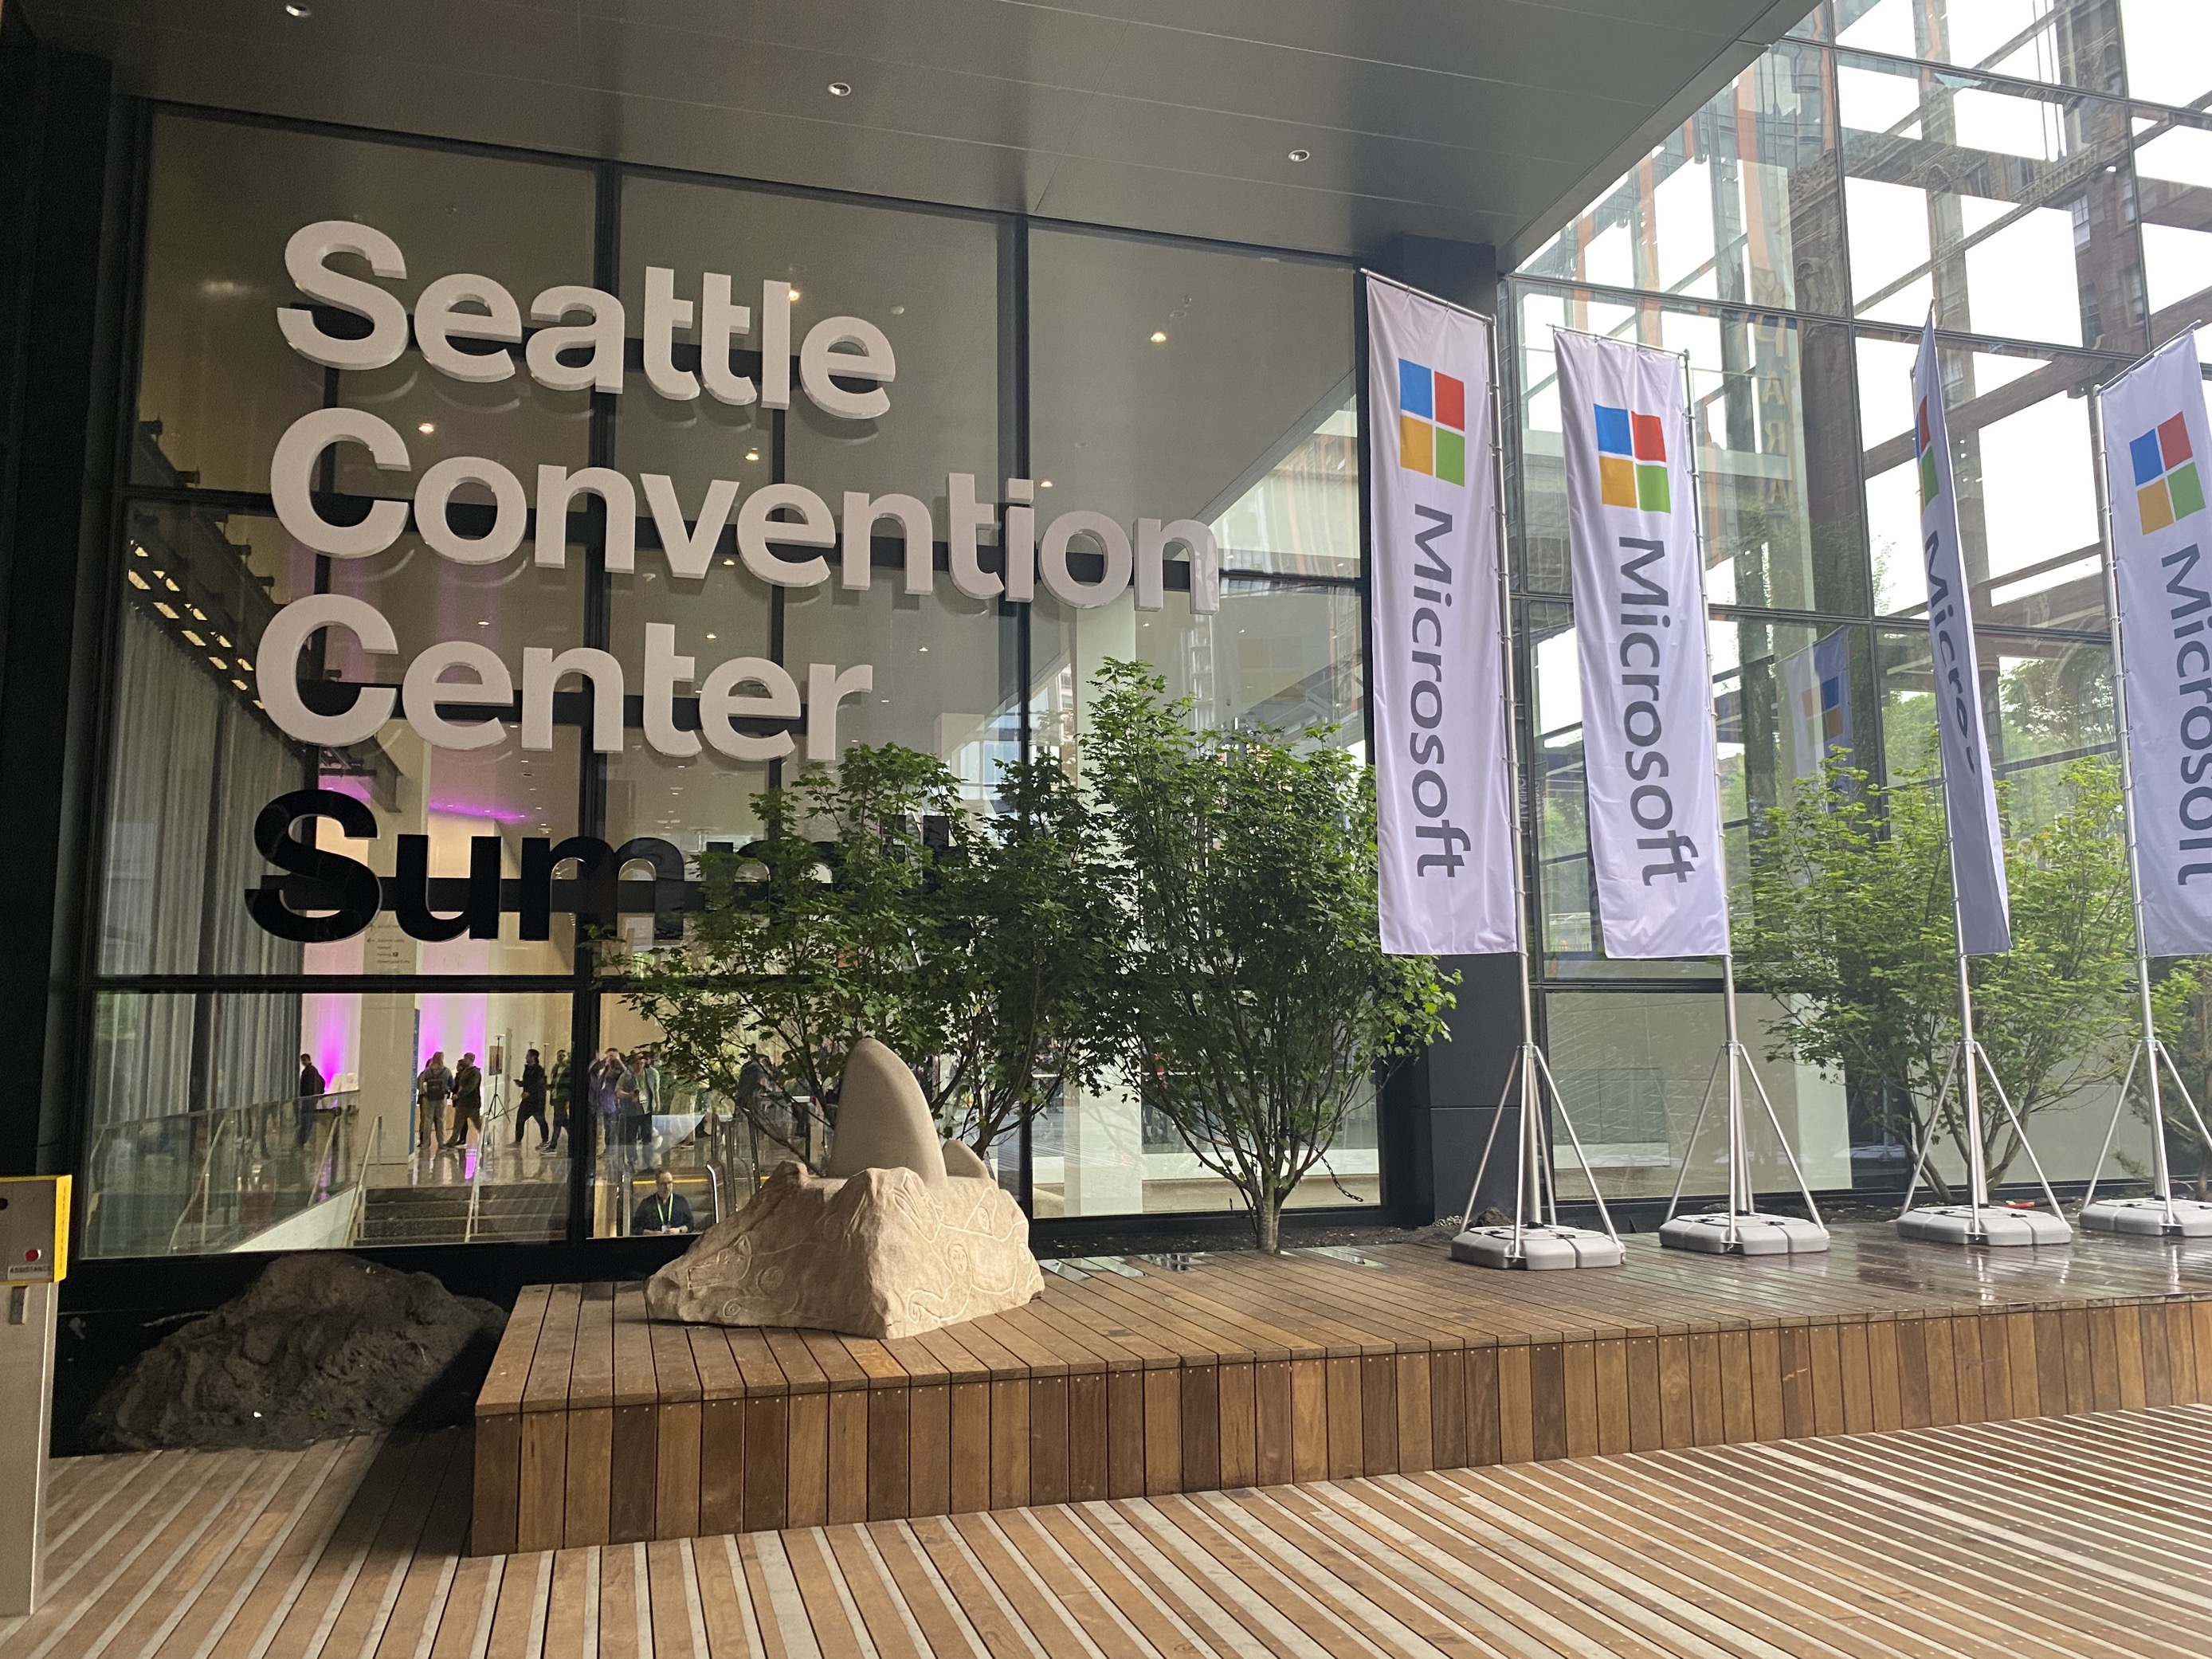 The new Seattle Convention Center